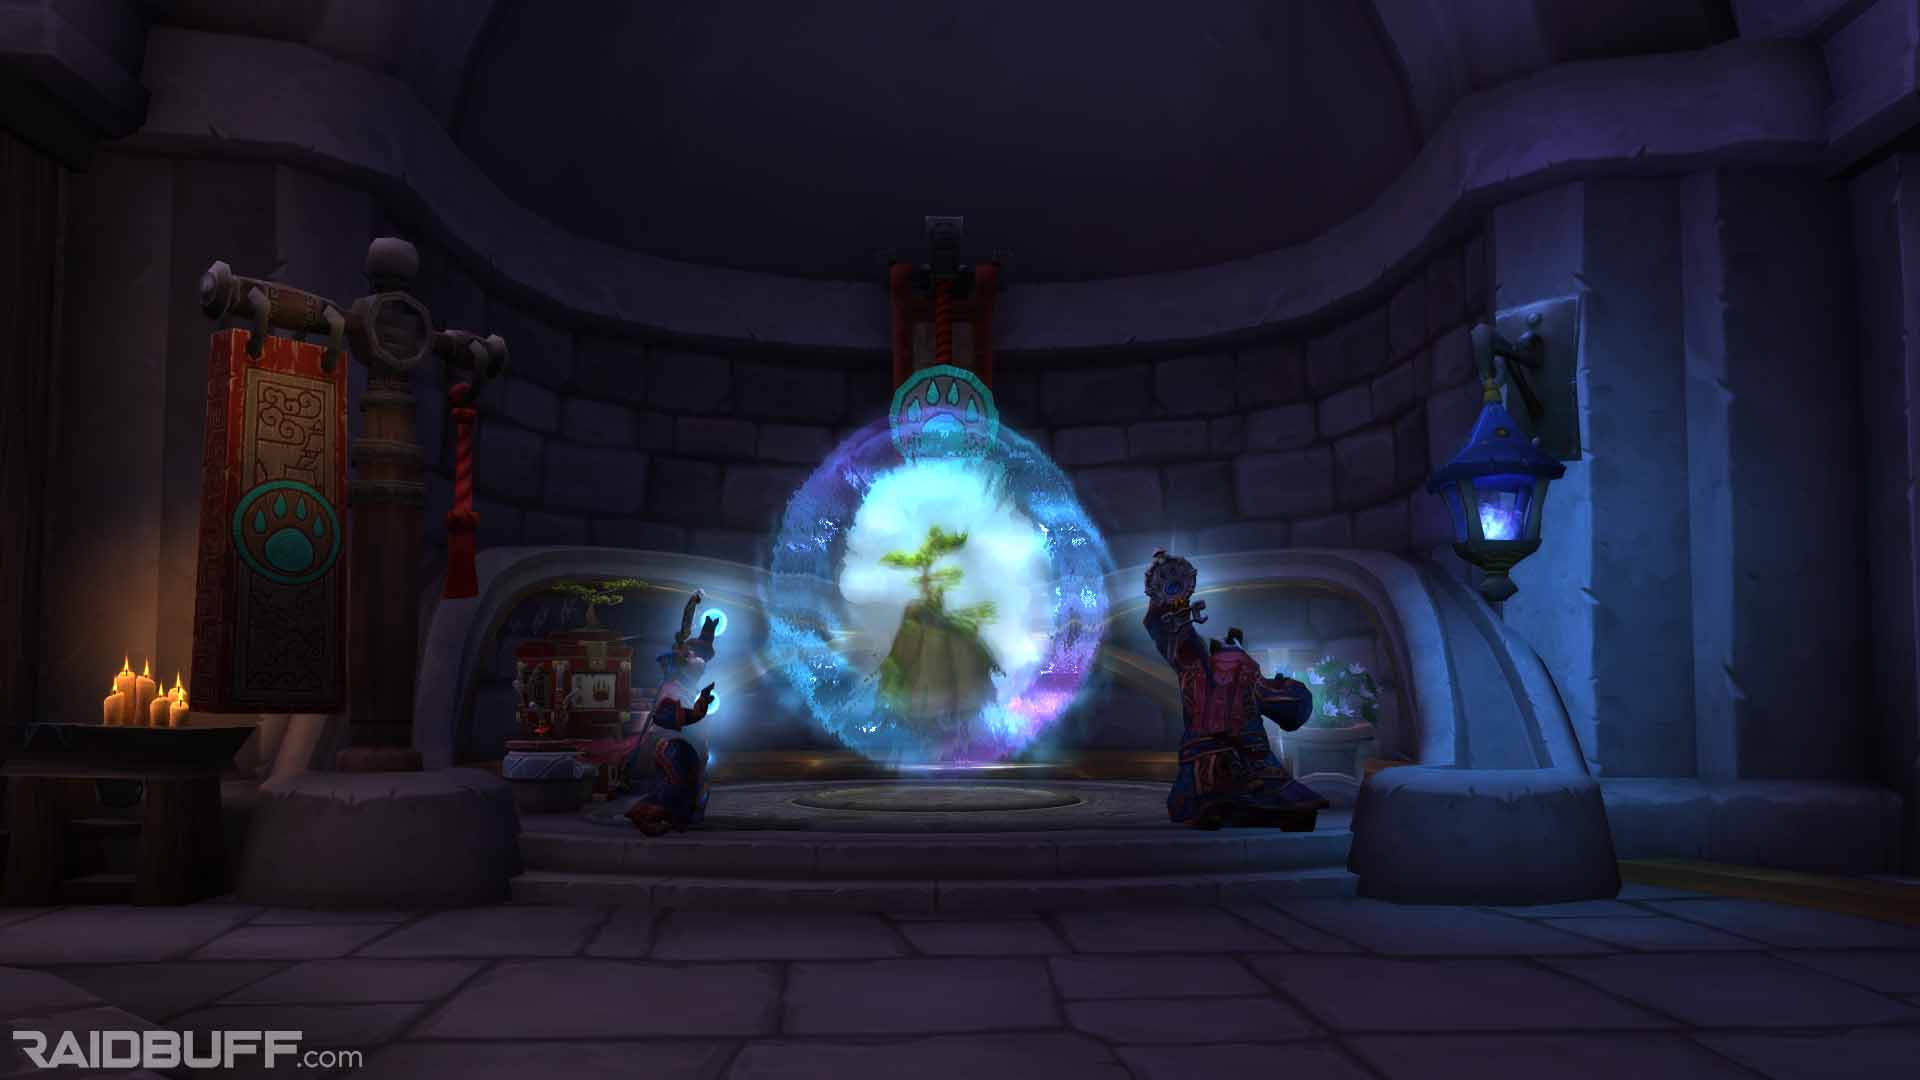 The Portal in Stormwind within the Wizard's Sanctumto Paw'don Village in the Jade Forest of Pandaria